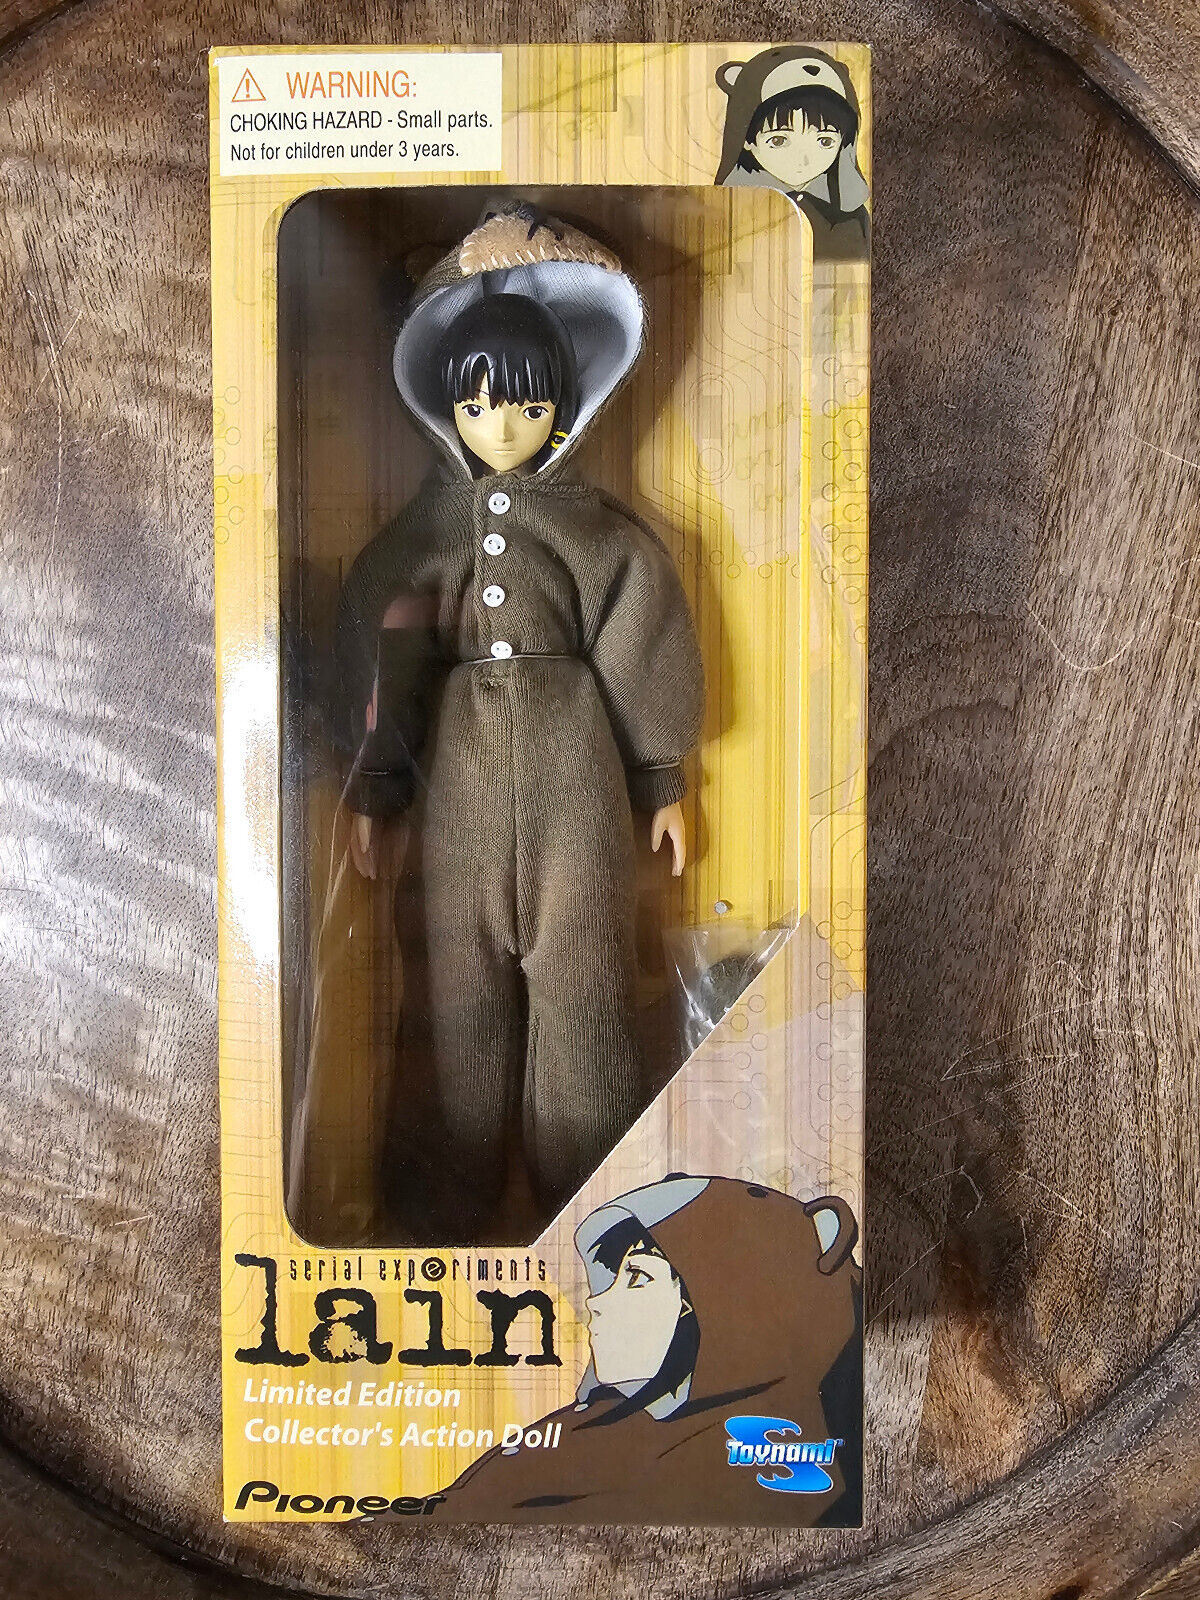 Serial Experiments Lain Limited Edition Collector's Action Doll Teddy Bear